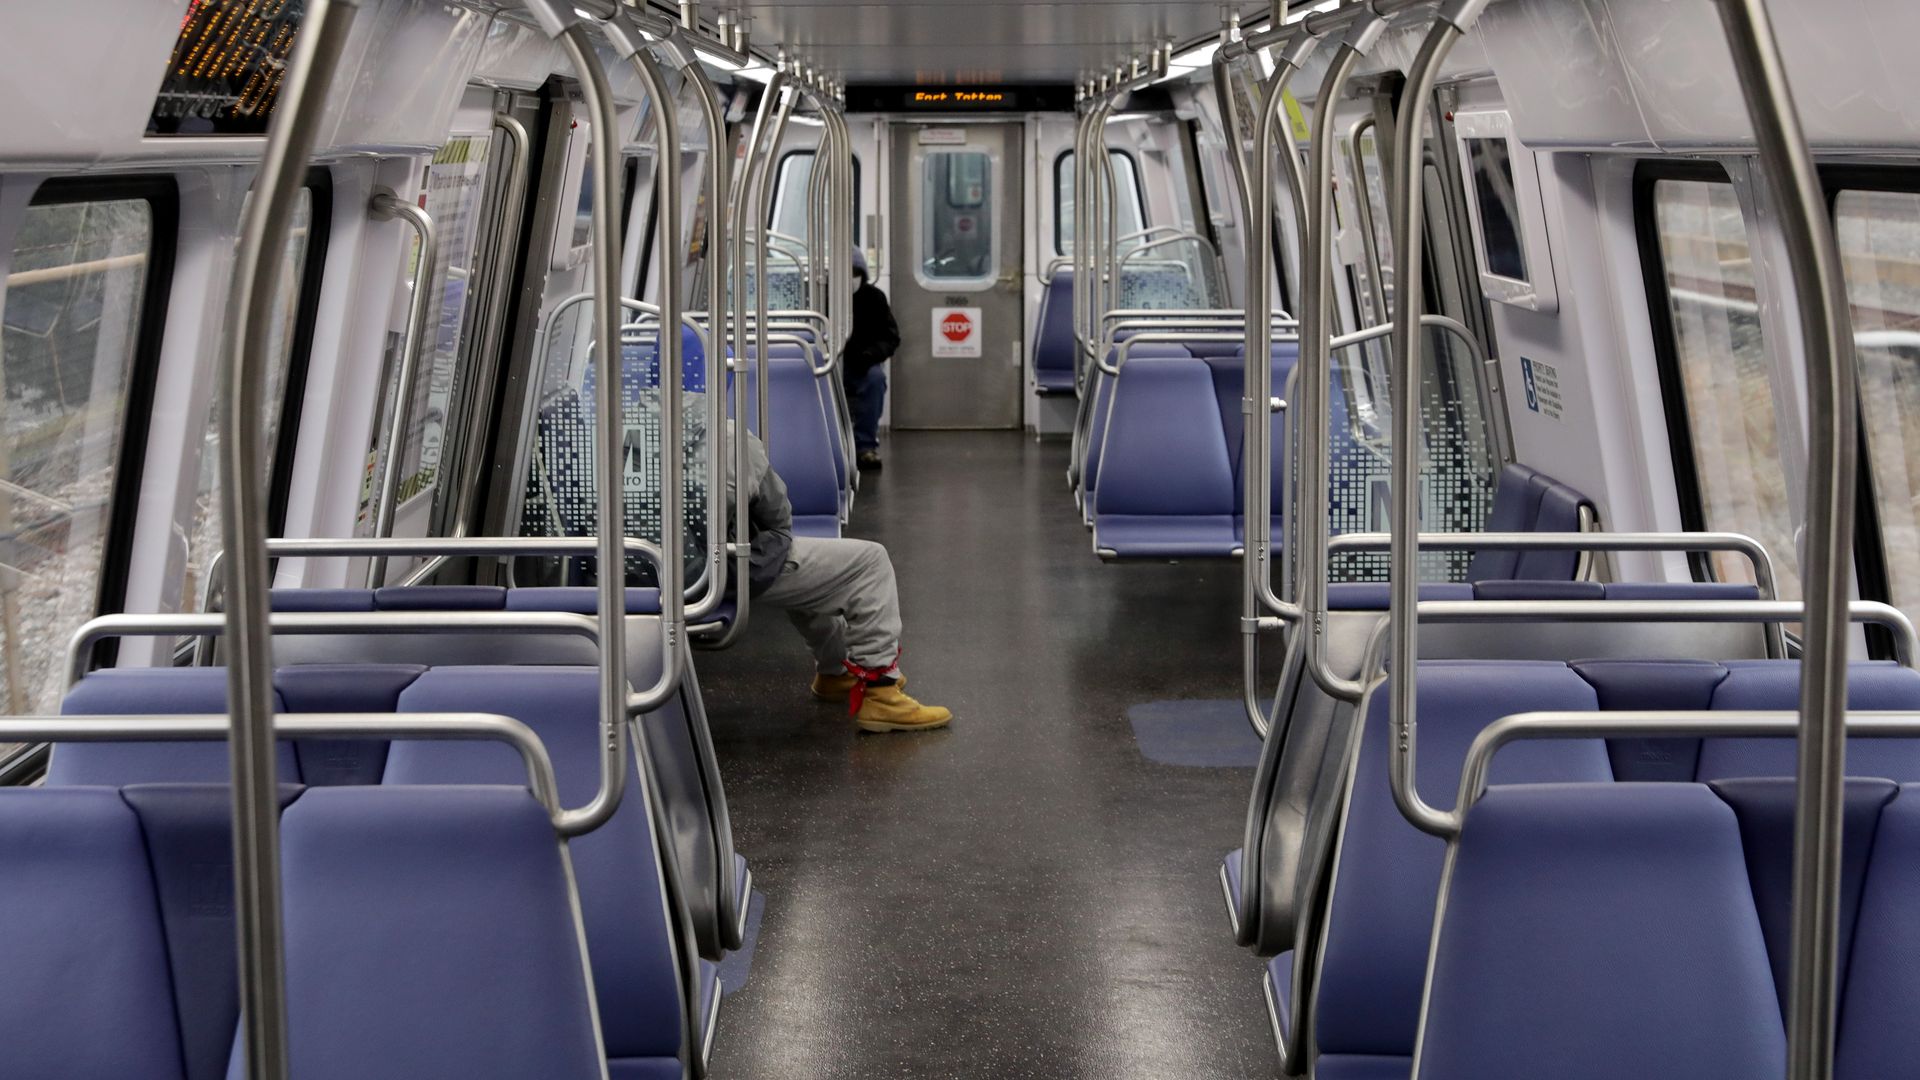 Inside of a mostly empty Metro train